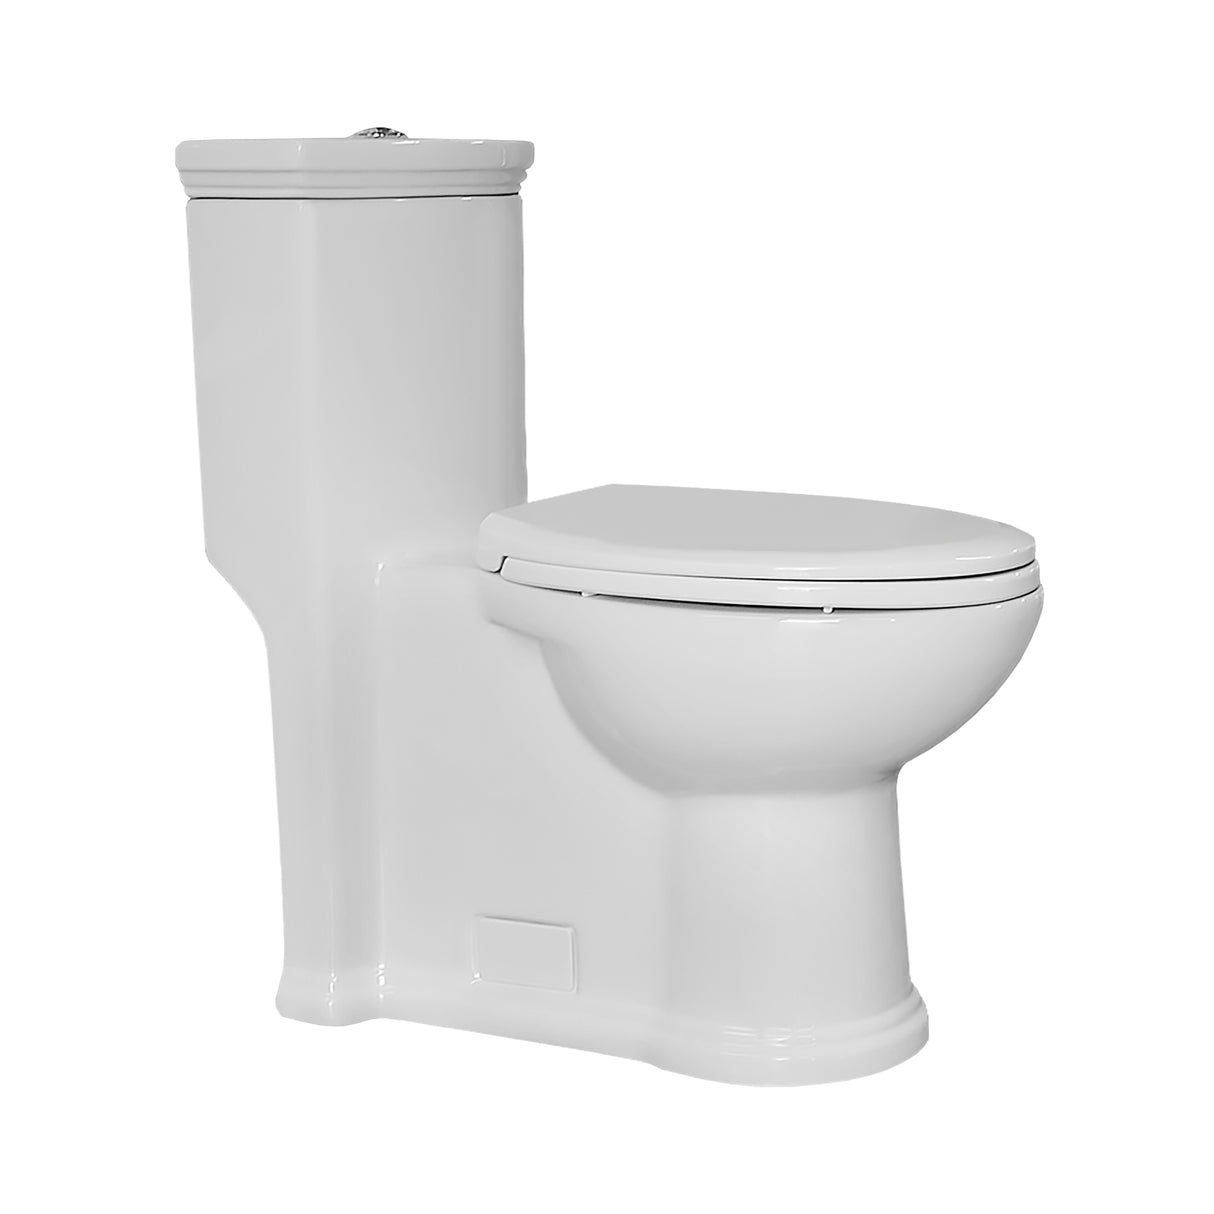 Magic Flush Eco-Friendly One Piece Toilet with a Siphonic Action Dual Flush System,  Elongated Bowl, 1.3/0.9 GPF and WaterSense Certified